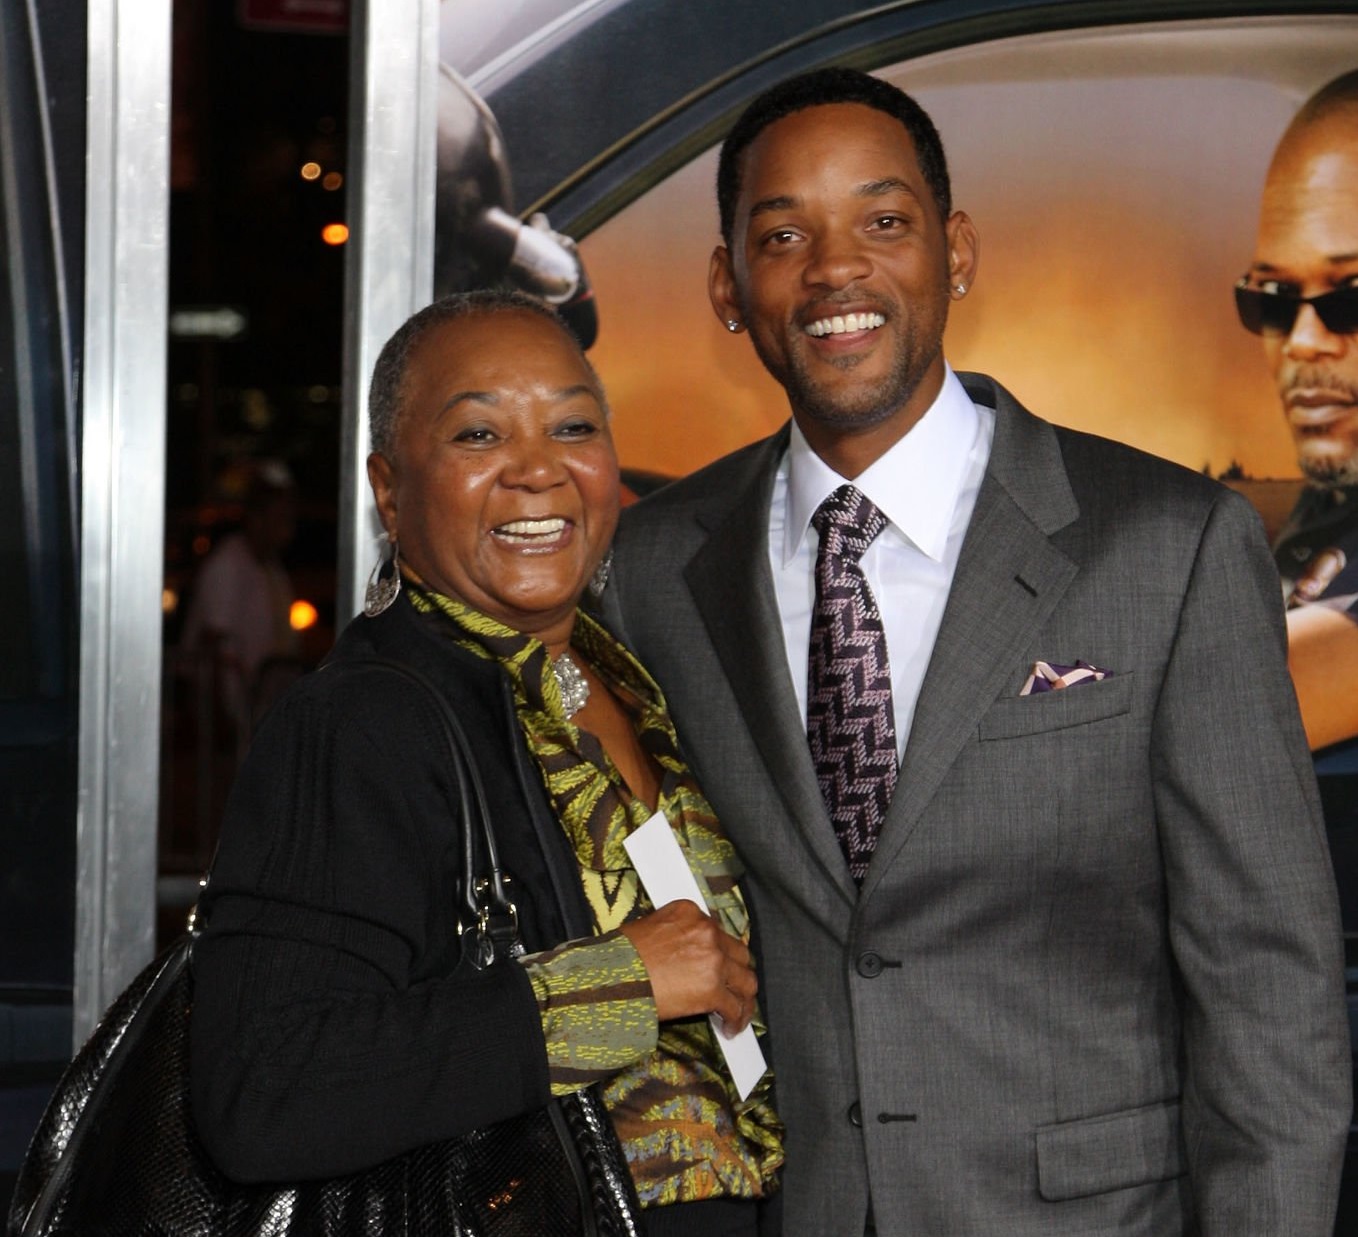 Will Smith and his mother Caroline Smith attend the Lakeview Terrace premiere at the AMC Lincoln Square in 2008.